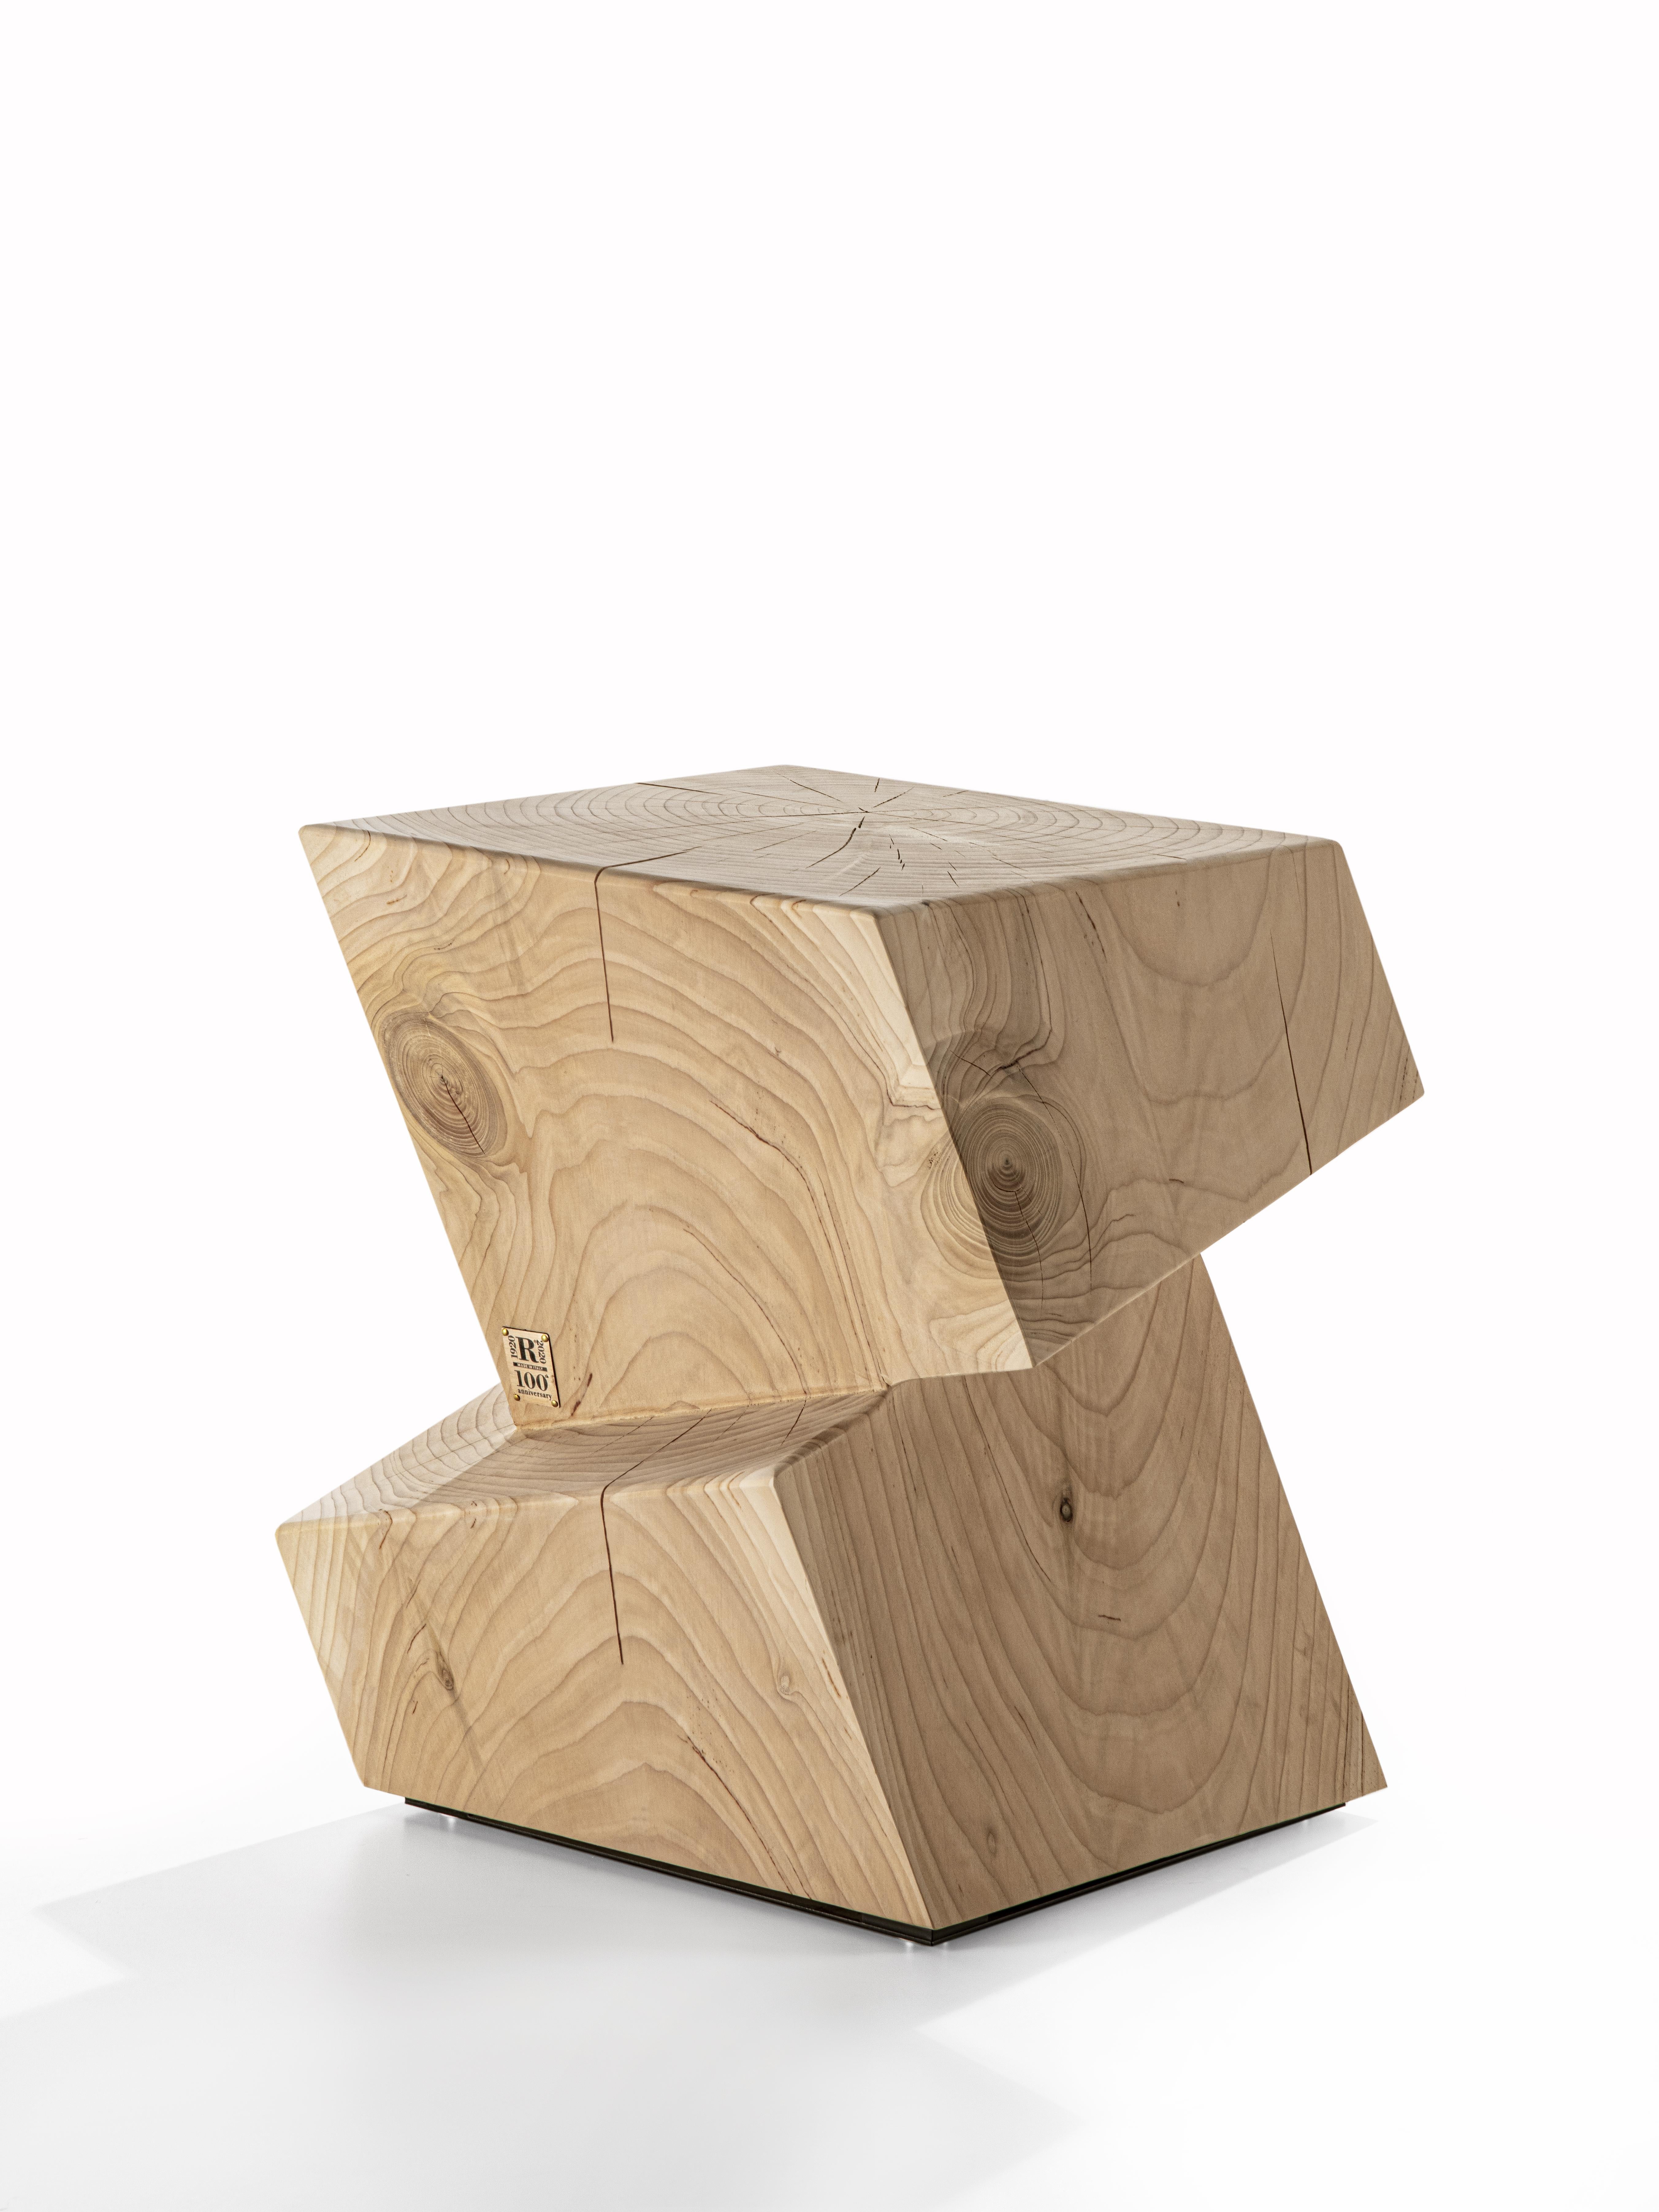 Rotterdam Stool Giovanni Tomasini Contemporary Natural Cedar Made in Italy  Riva1 For Sale at 1stDibs